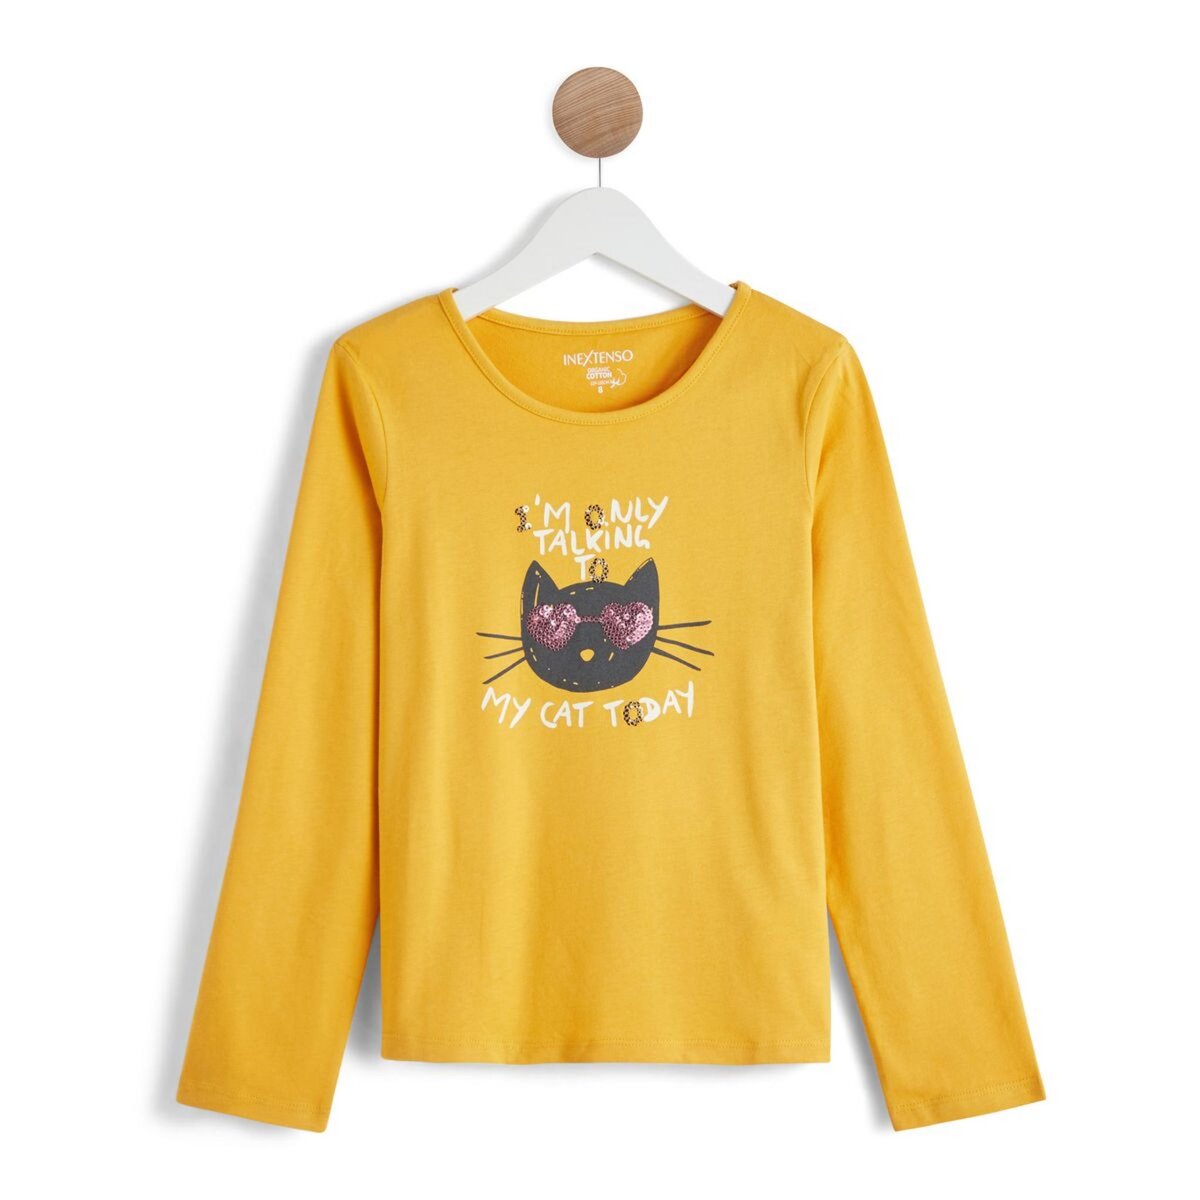 IN EXTENSO T-shirt manches longues à sequins reversibles chat fille